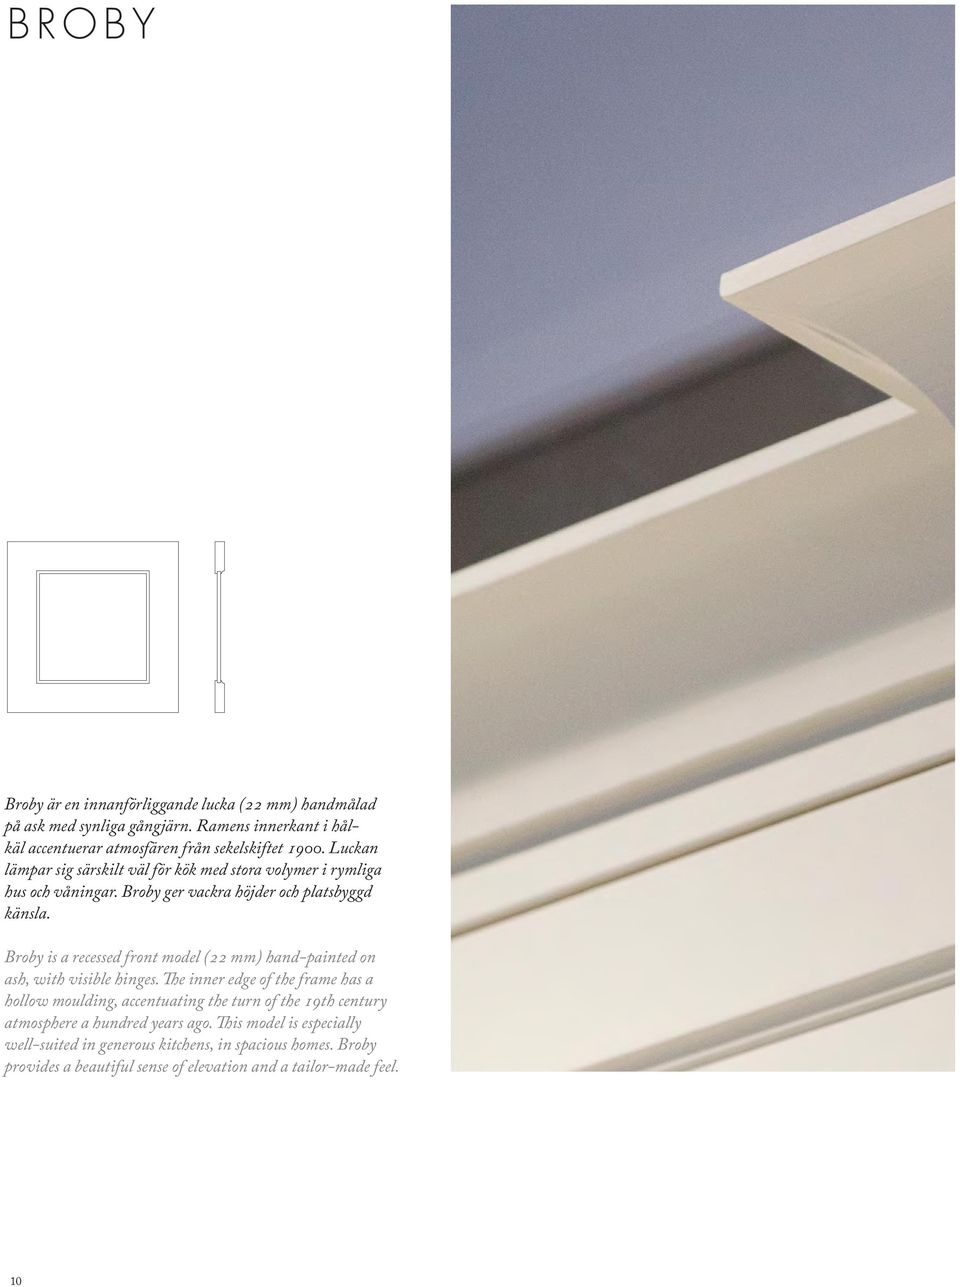 Broby is a recessed front model (22 mm) hand-painted on ash, with visible hinges.